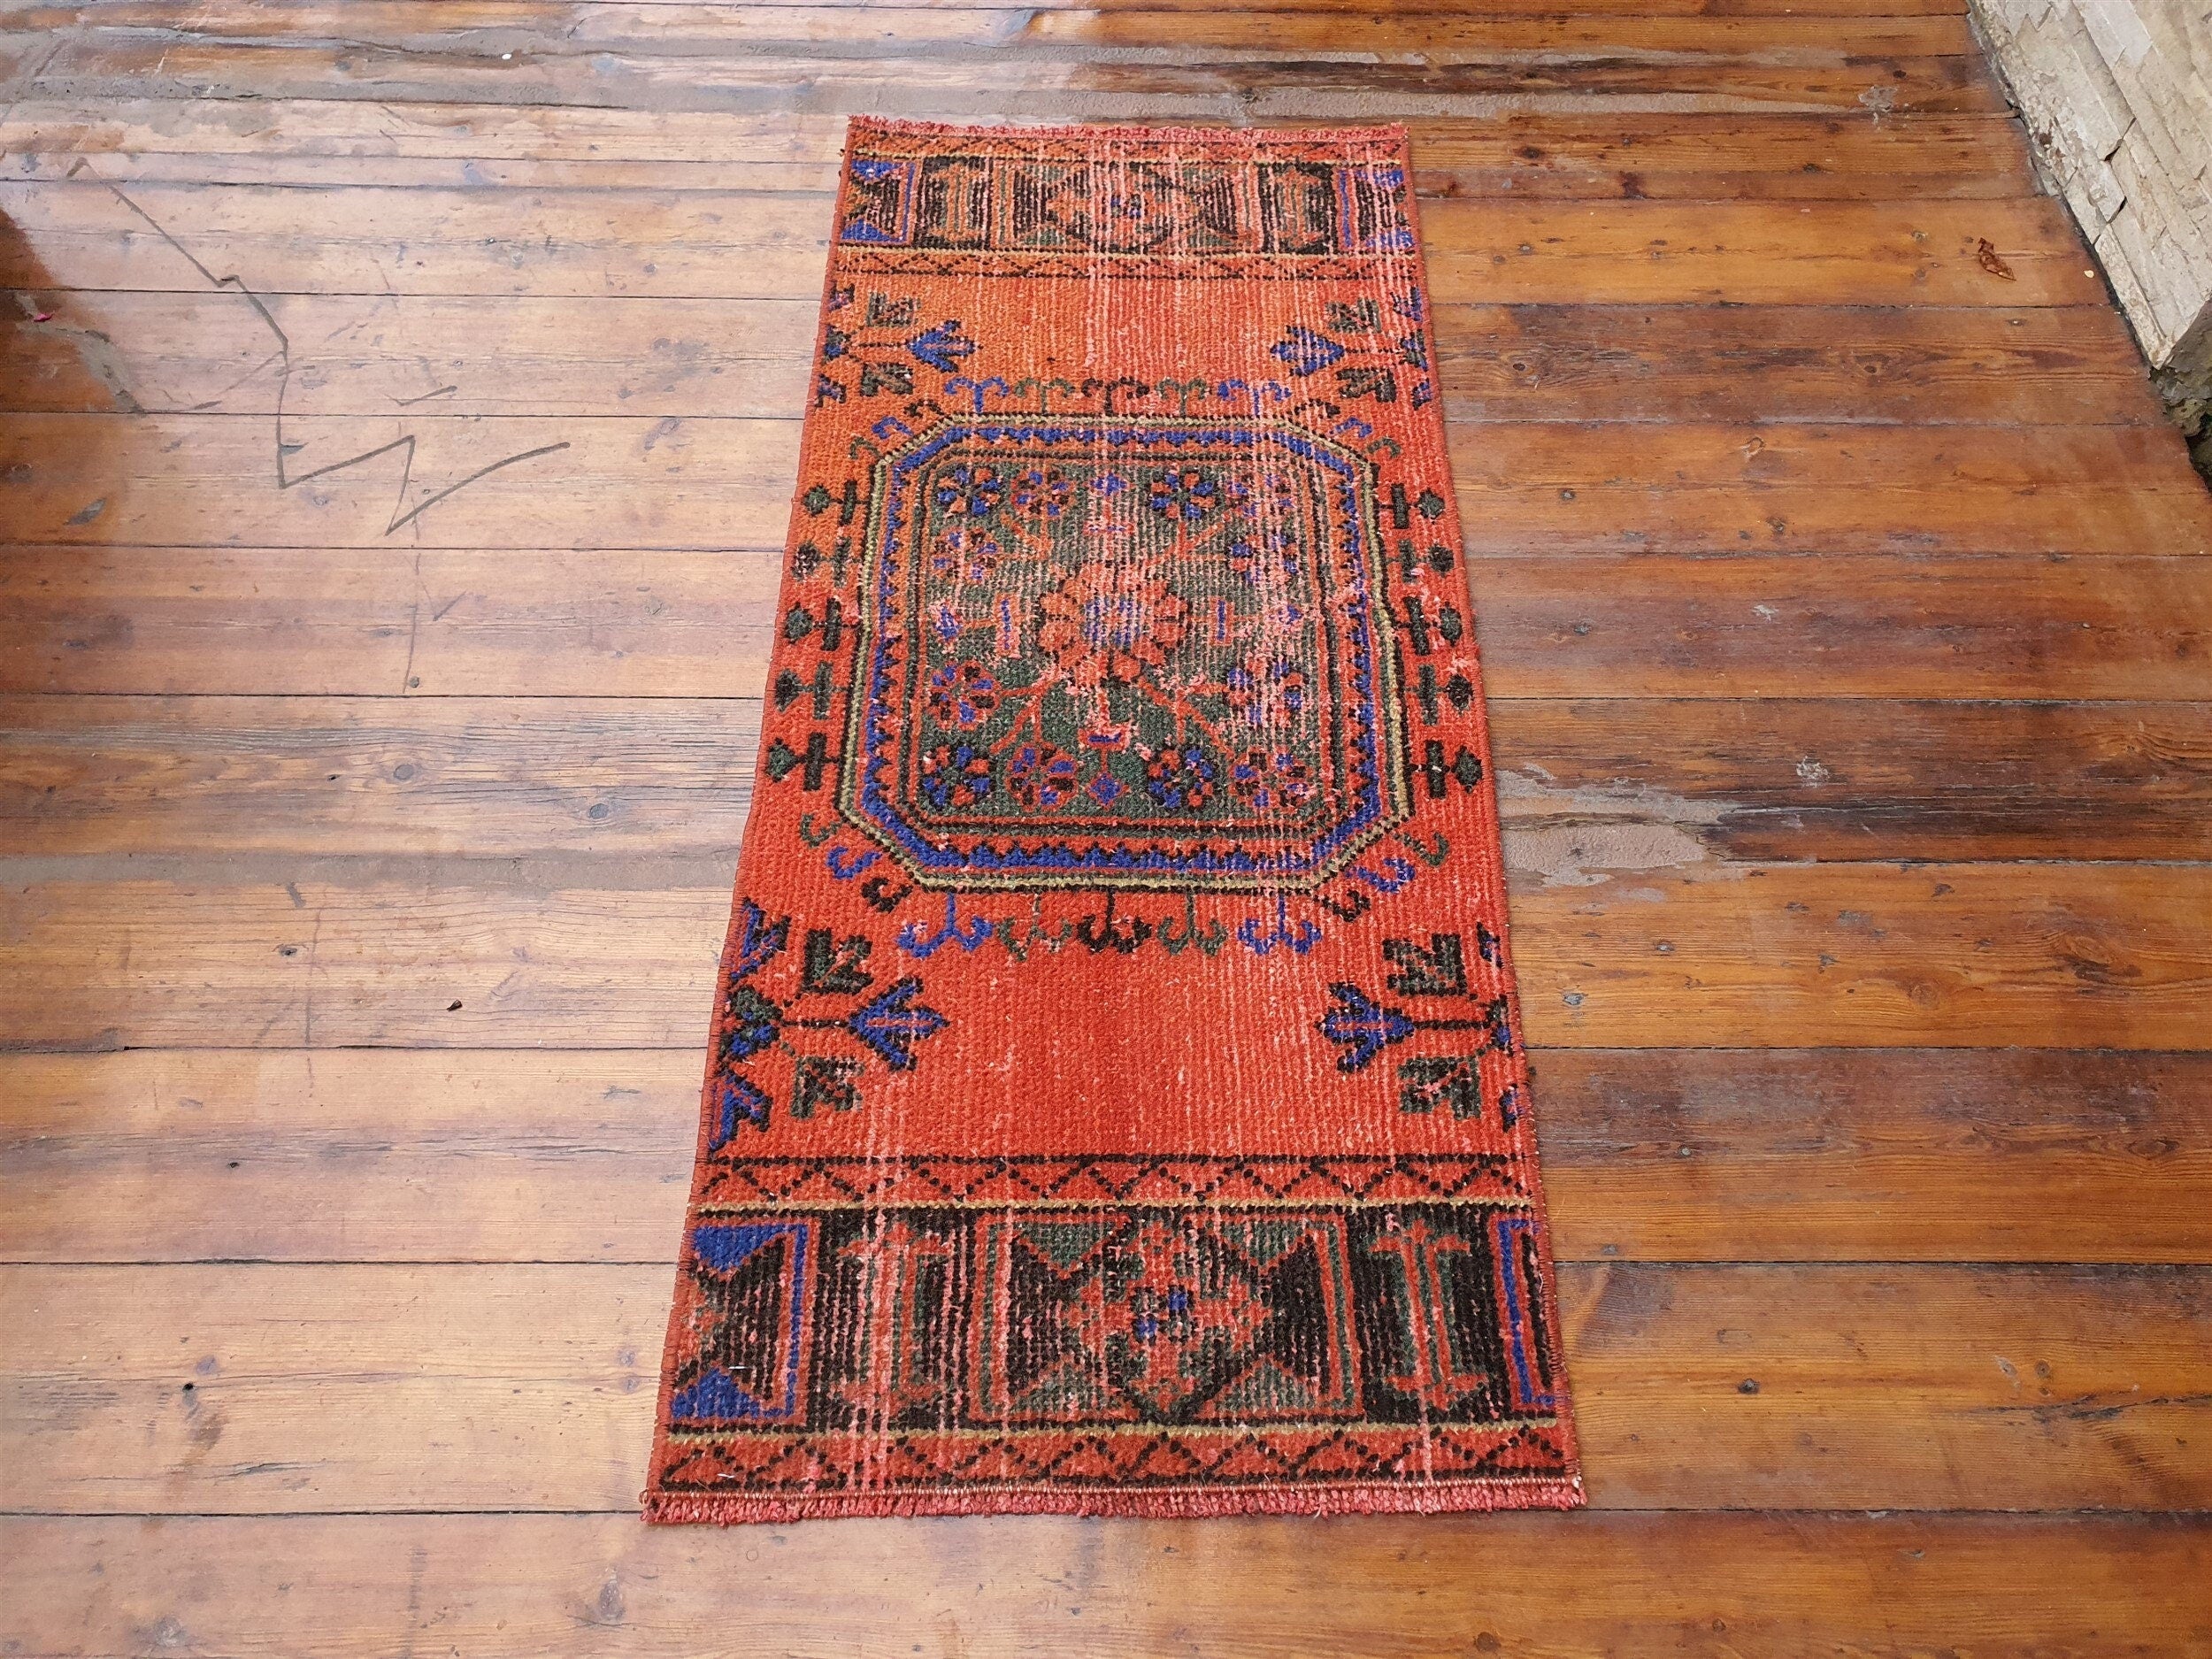 Small Turkish Rug, 4 ft x 1 ft 7 in, Apricot Orange and Teal Green / Grey Vintage Faded Distressed Door Mat